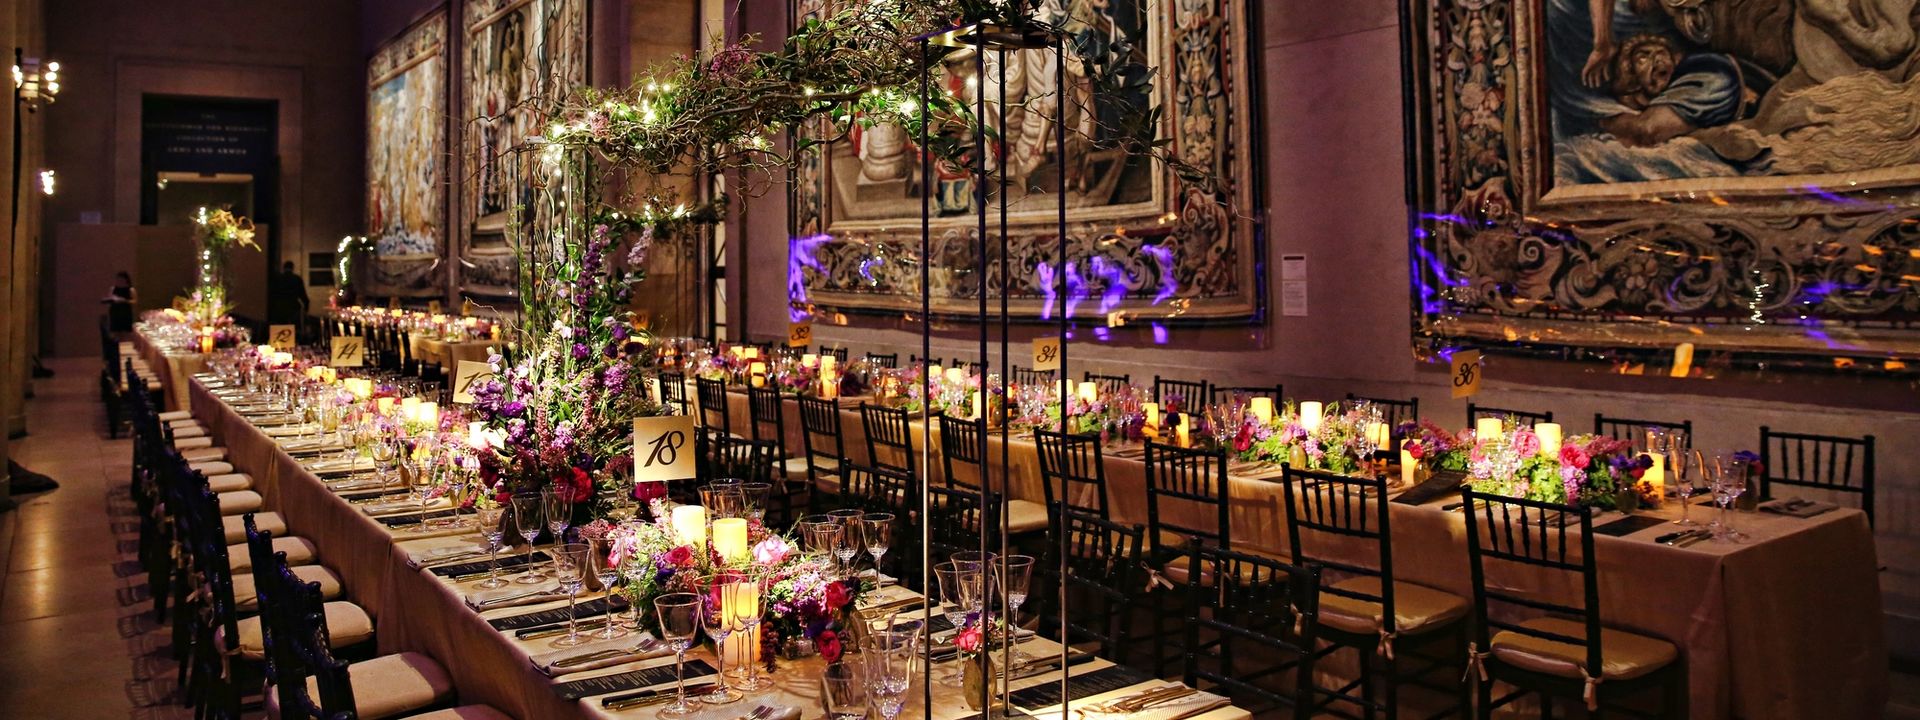 Long tables decorated with candles and colorful flowers for a wedding reception on the east balcony in the main building